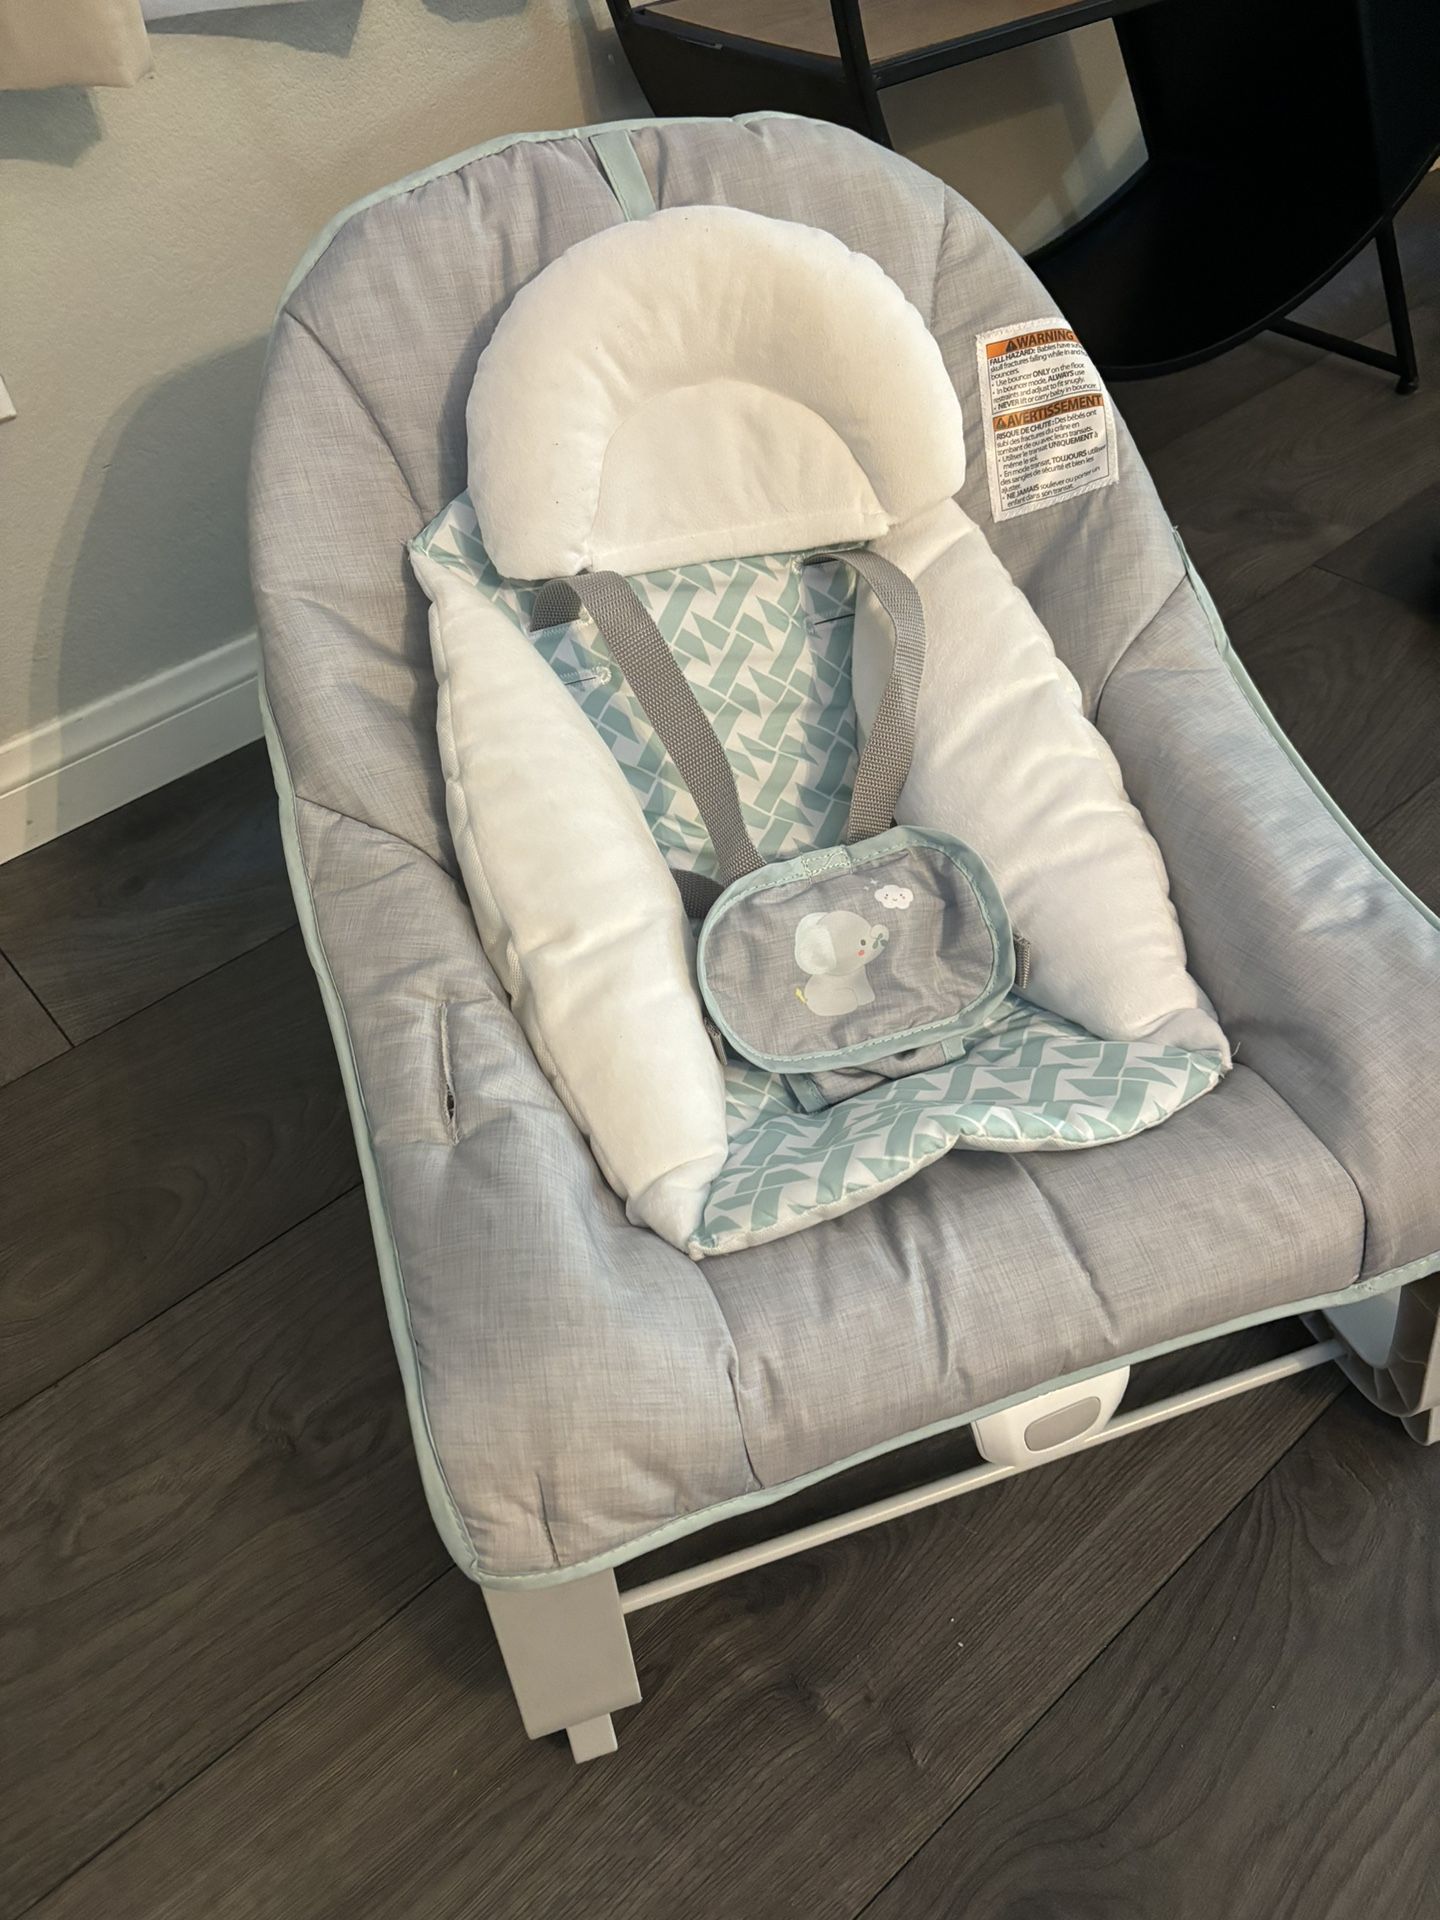 Baby Rocking Chair 